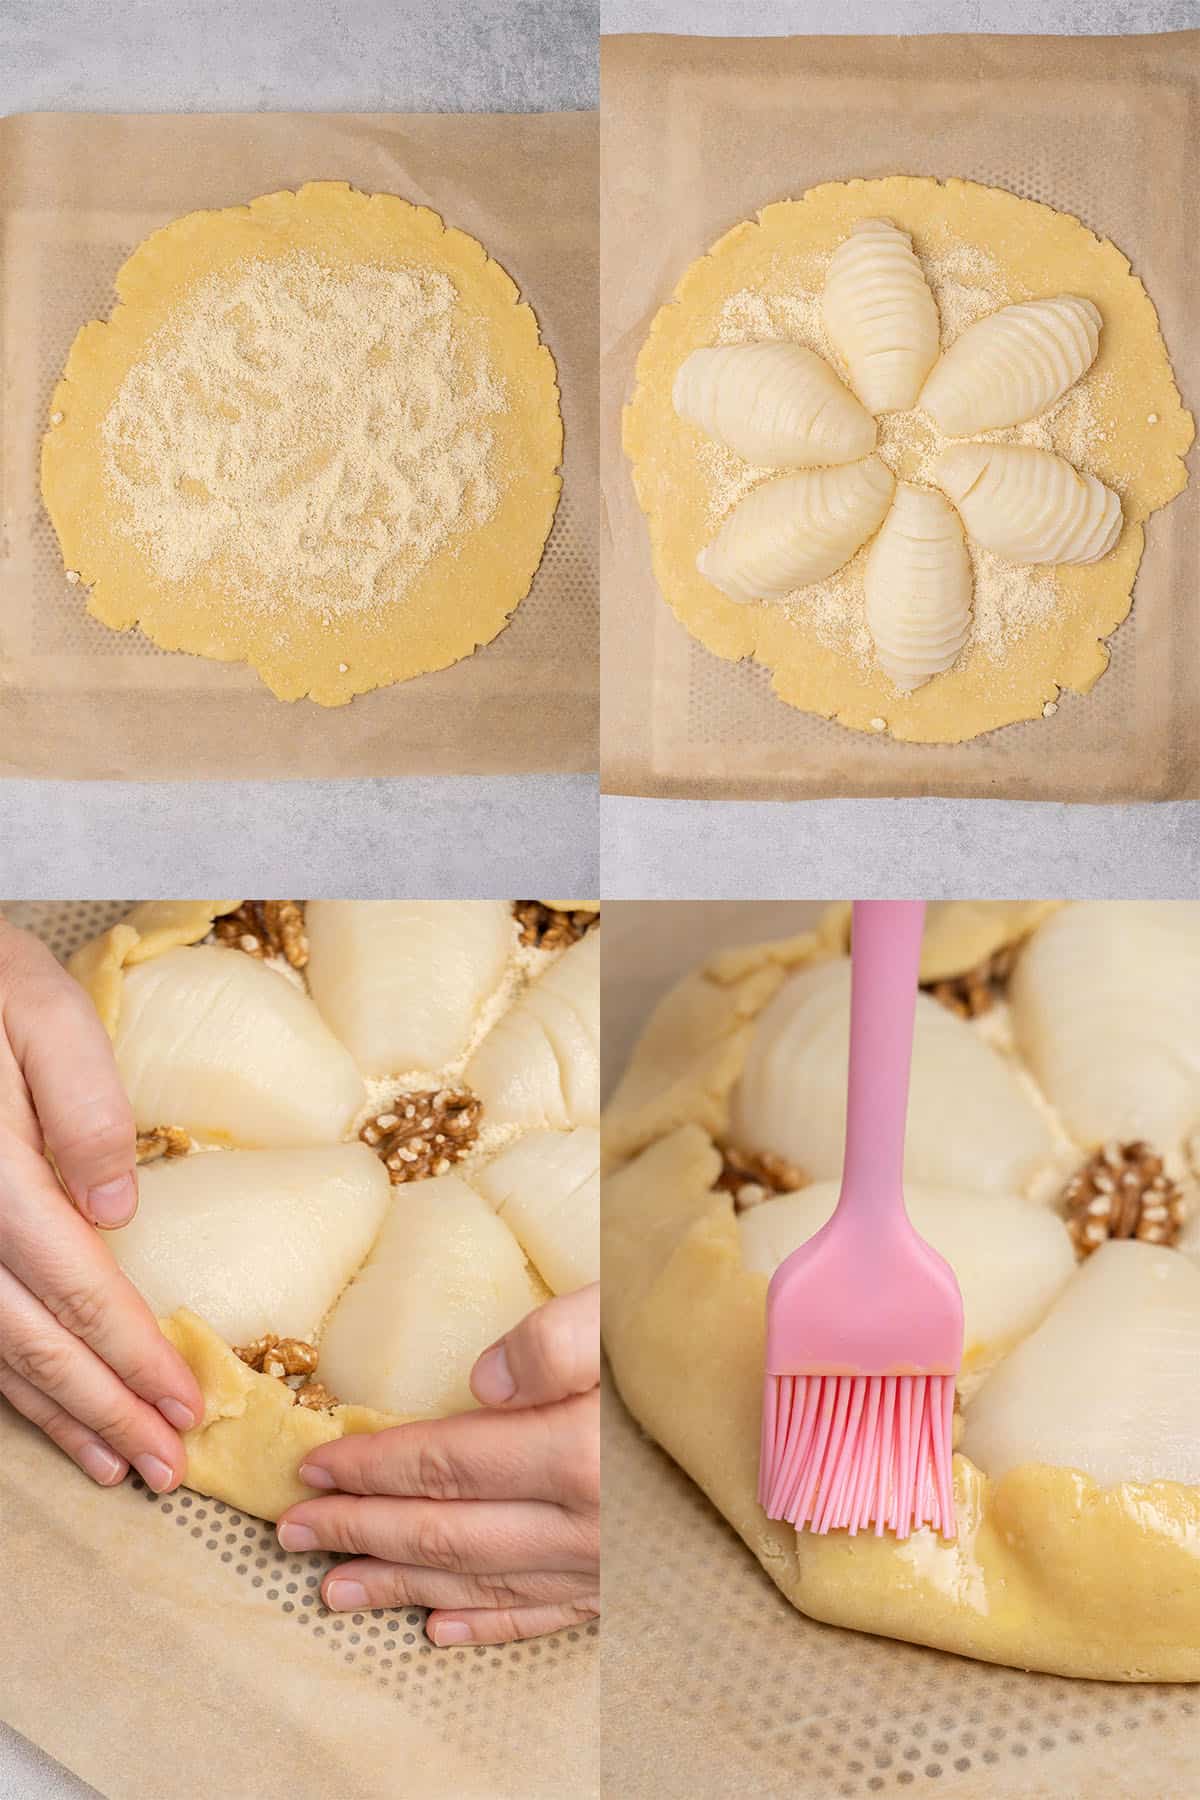 Pear galette step-by-step assembly.